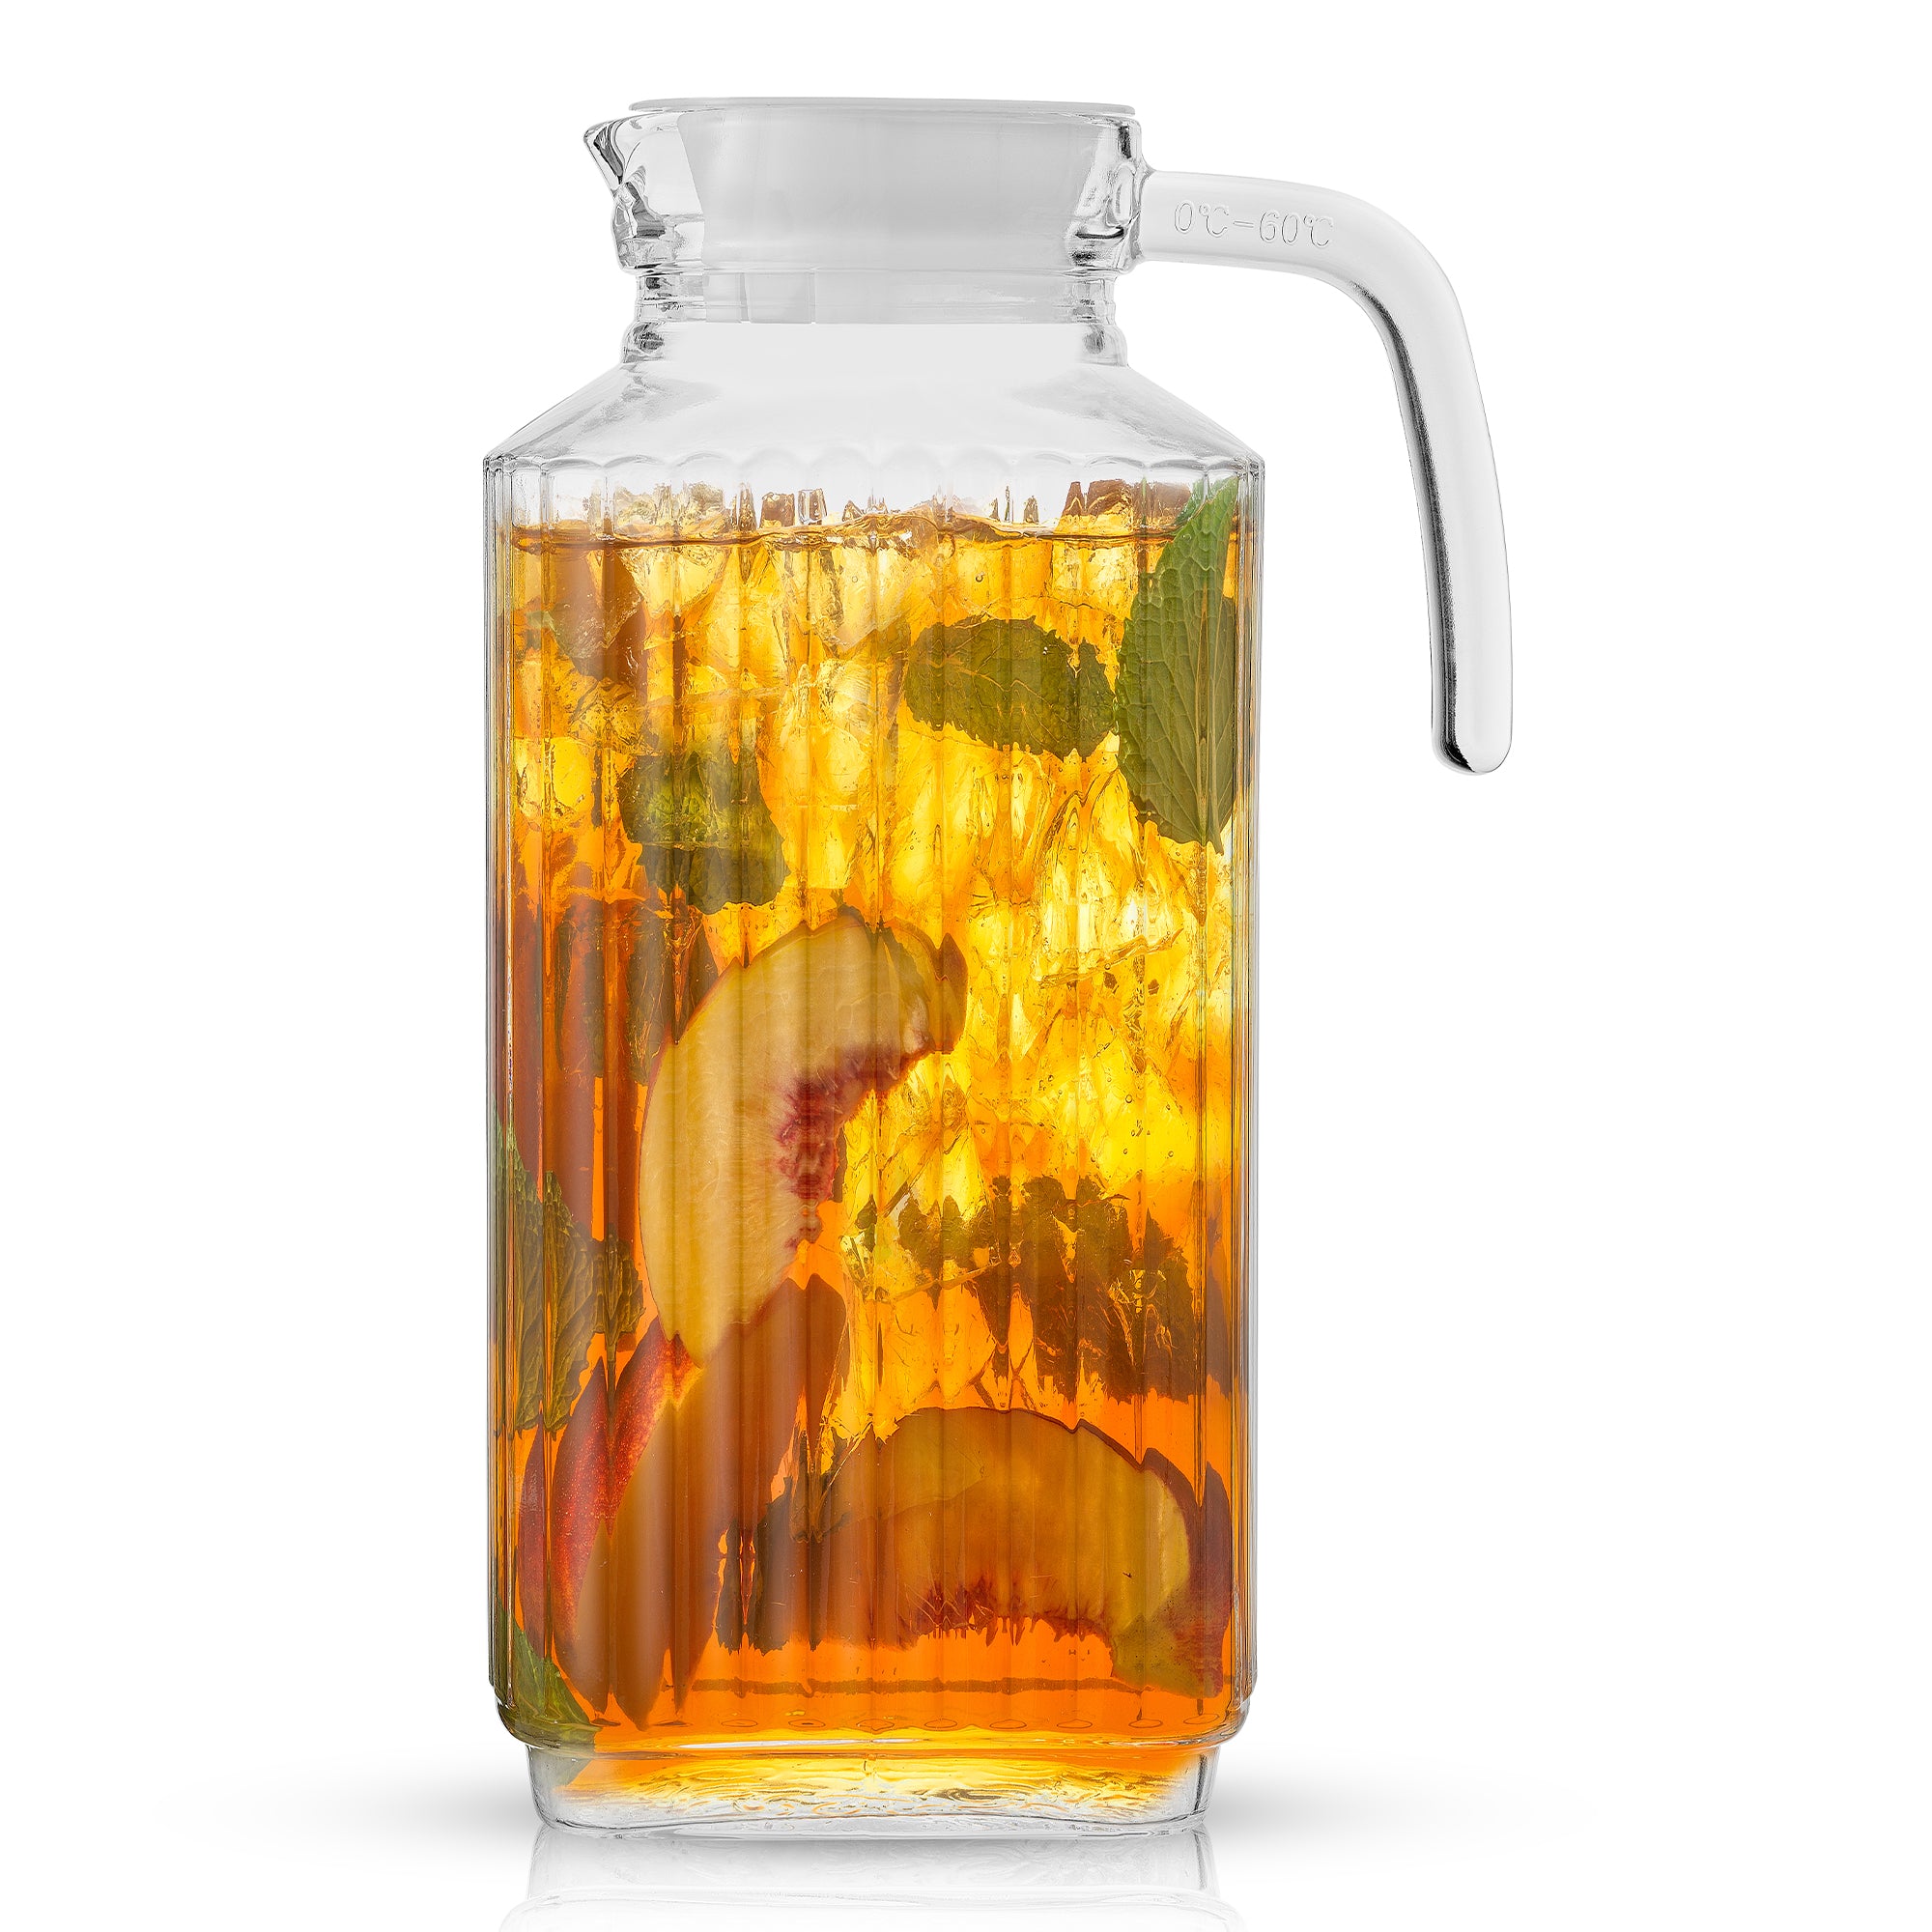 A 60-ounce JoyJolt Beverage Serveware Glass Pitcher filled with iced tea, peaches, and mint leaves sits on a white background. The pitcher has a clear handle and spout for pouring. Ice cubes float in the tea.